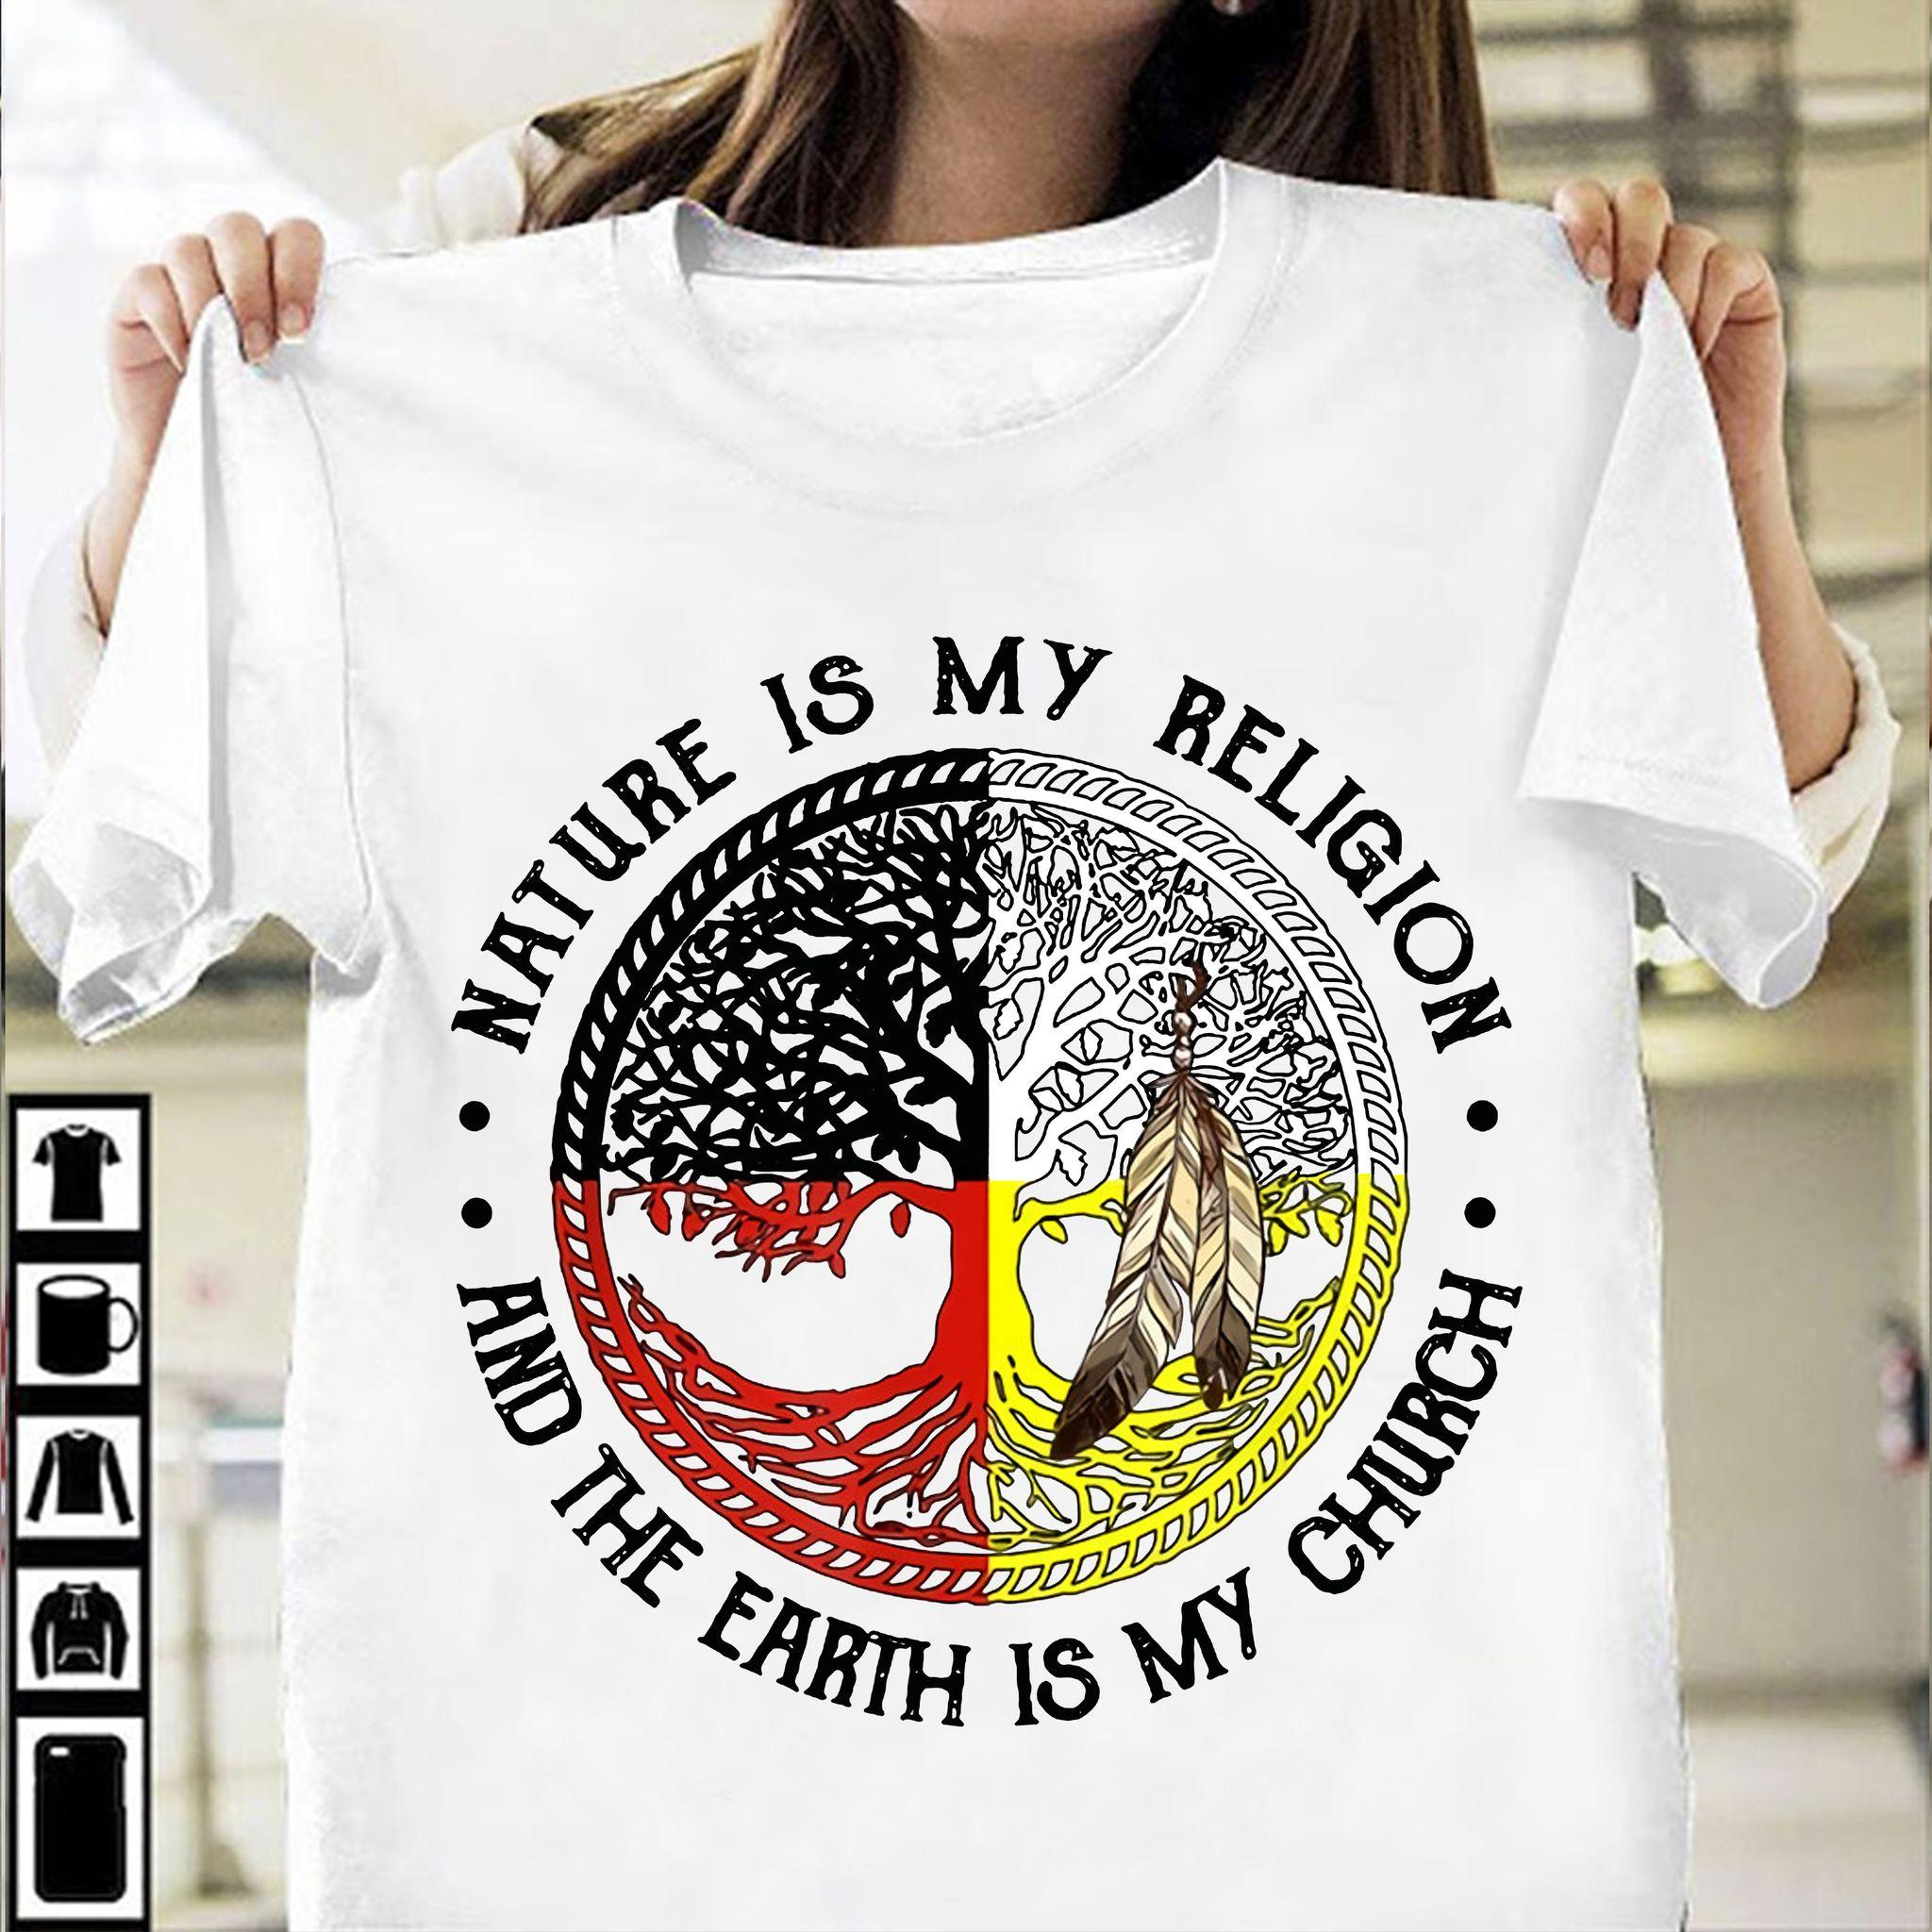 Nature is my religion and the earth is my church - Native American, Native American symbol